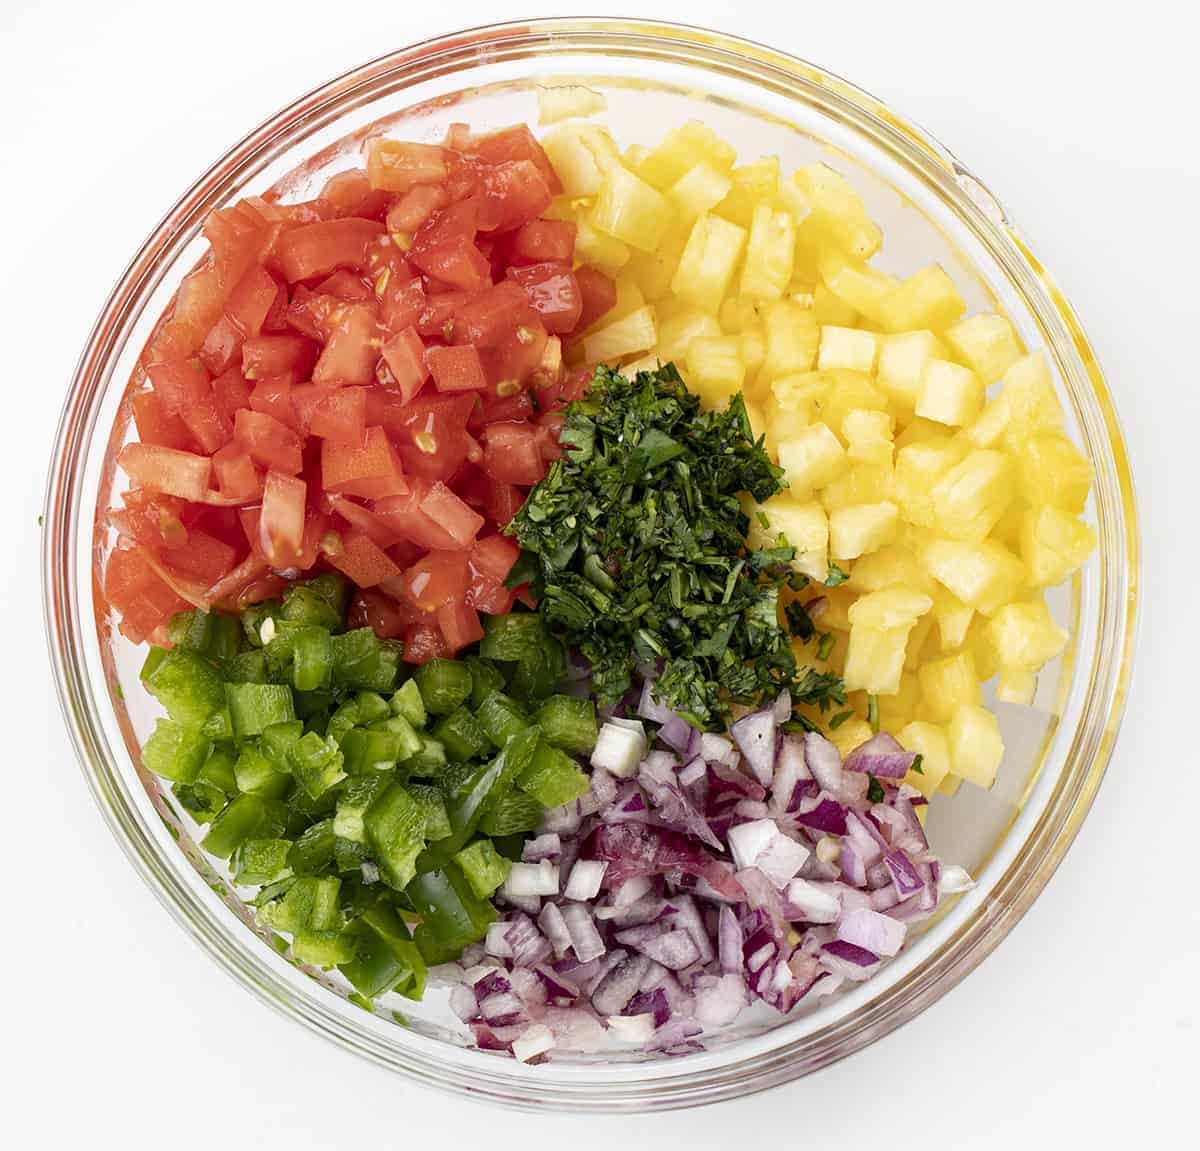 Raw Ingredients to Make Pineapple Salsa in a Bowl from Overhead